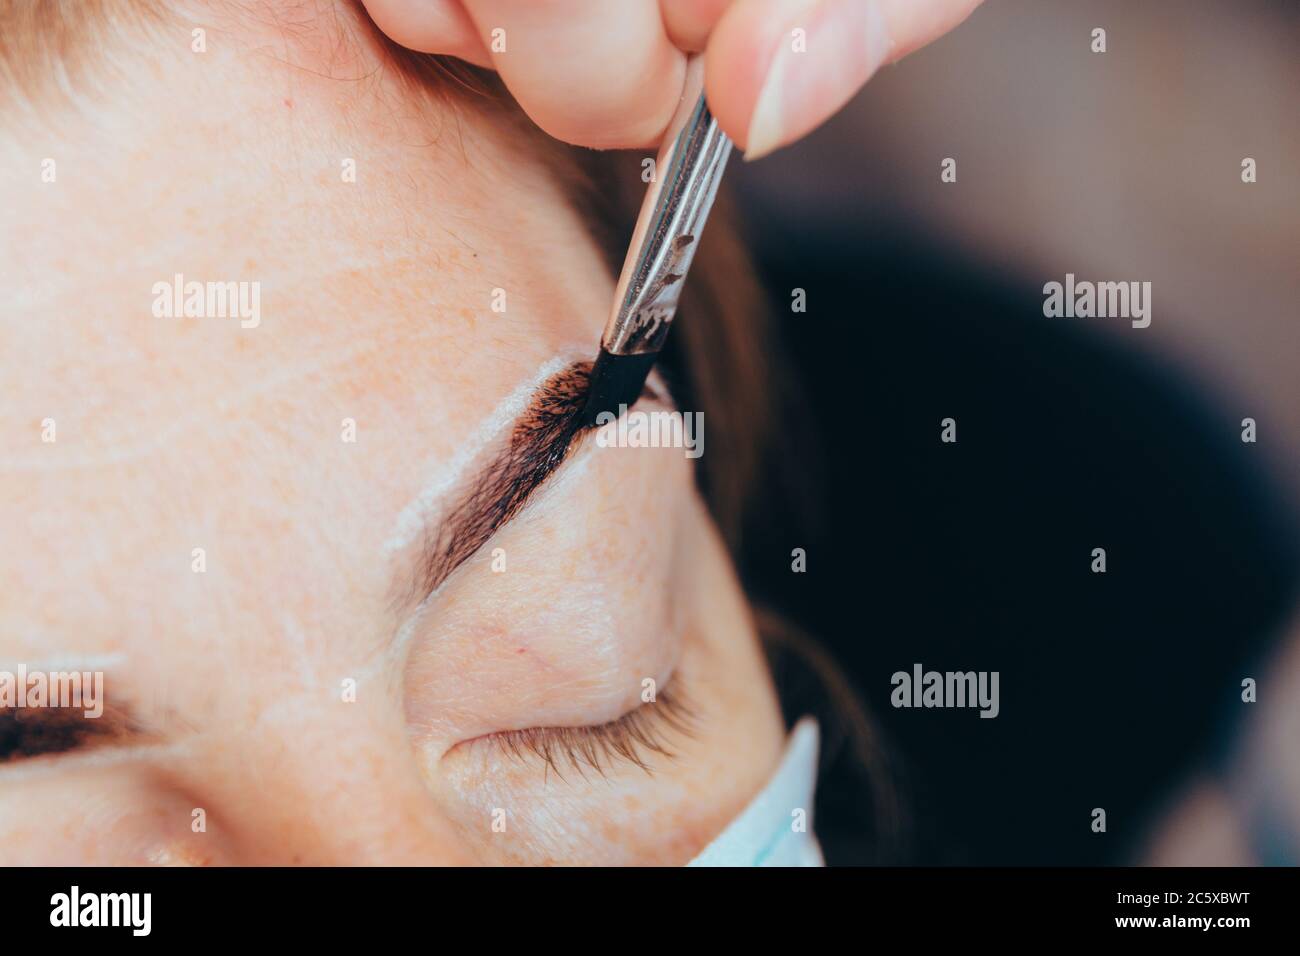 Cosmetic procedure. Correction and coloring of the eyebrows, shaping the eyebrows. Selective focus. Stock Photo